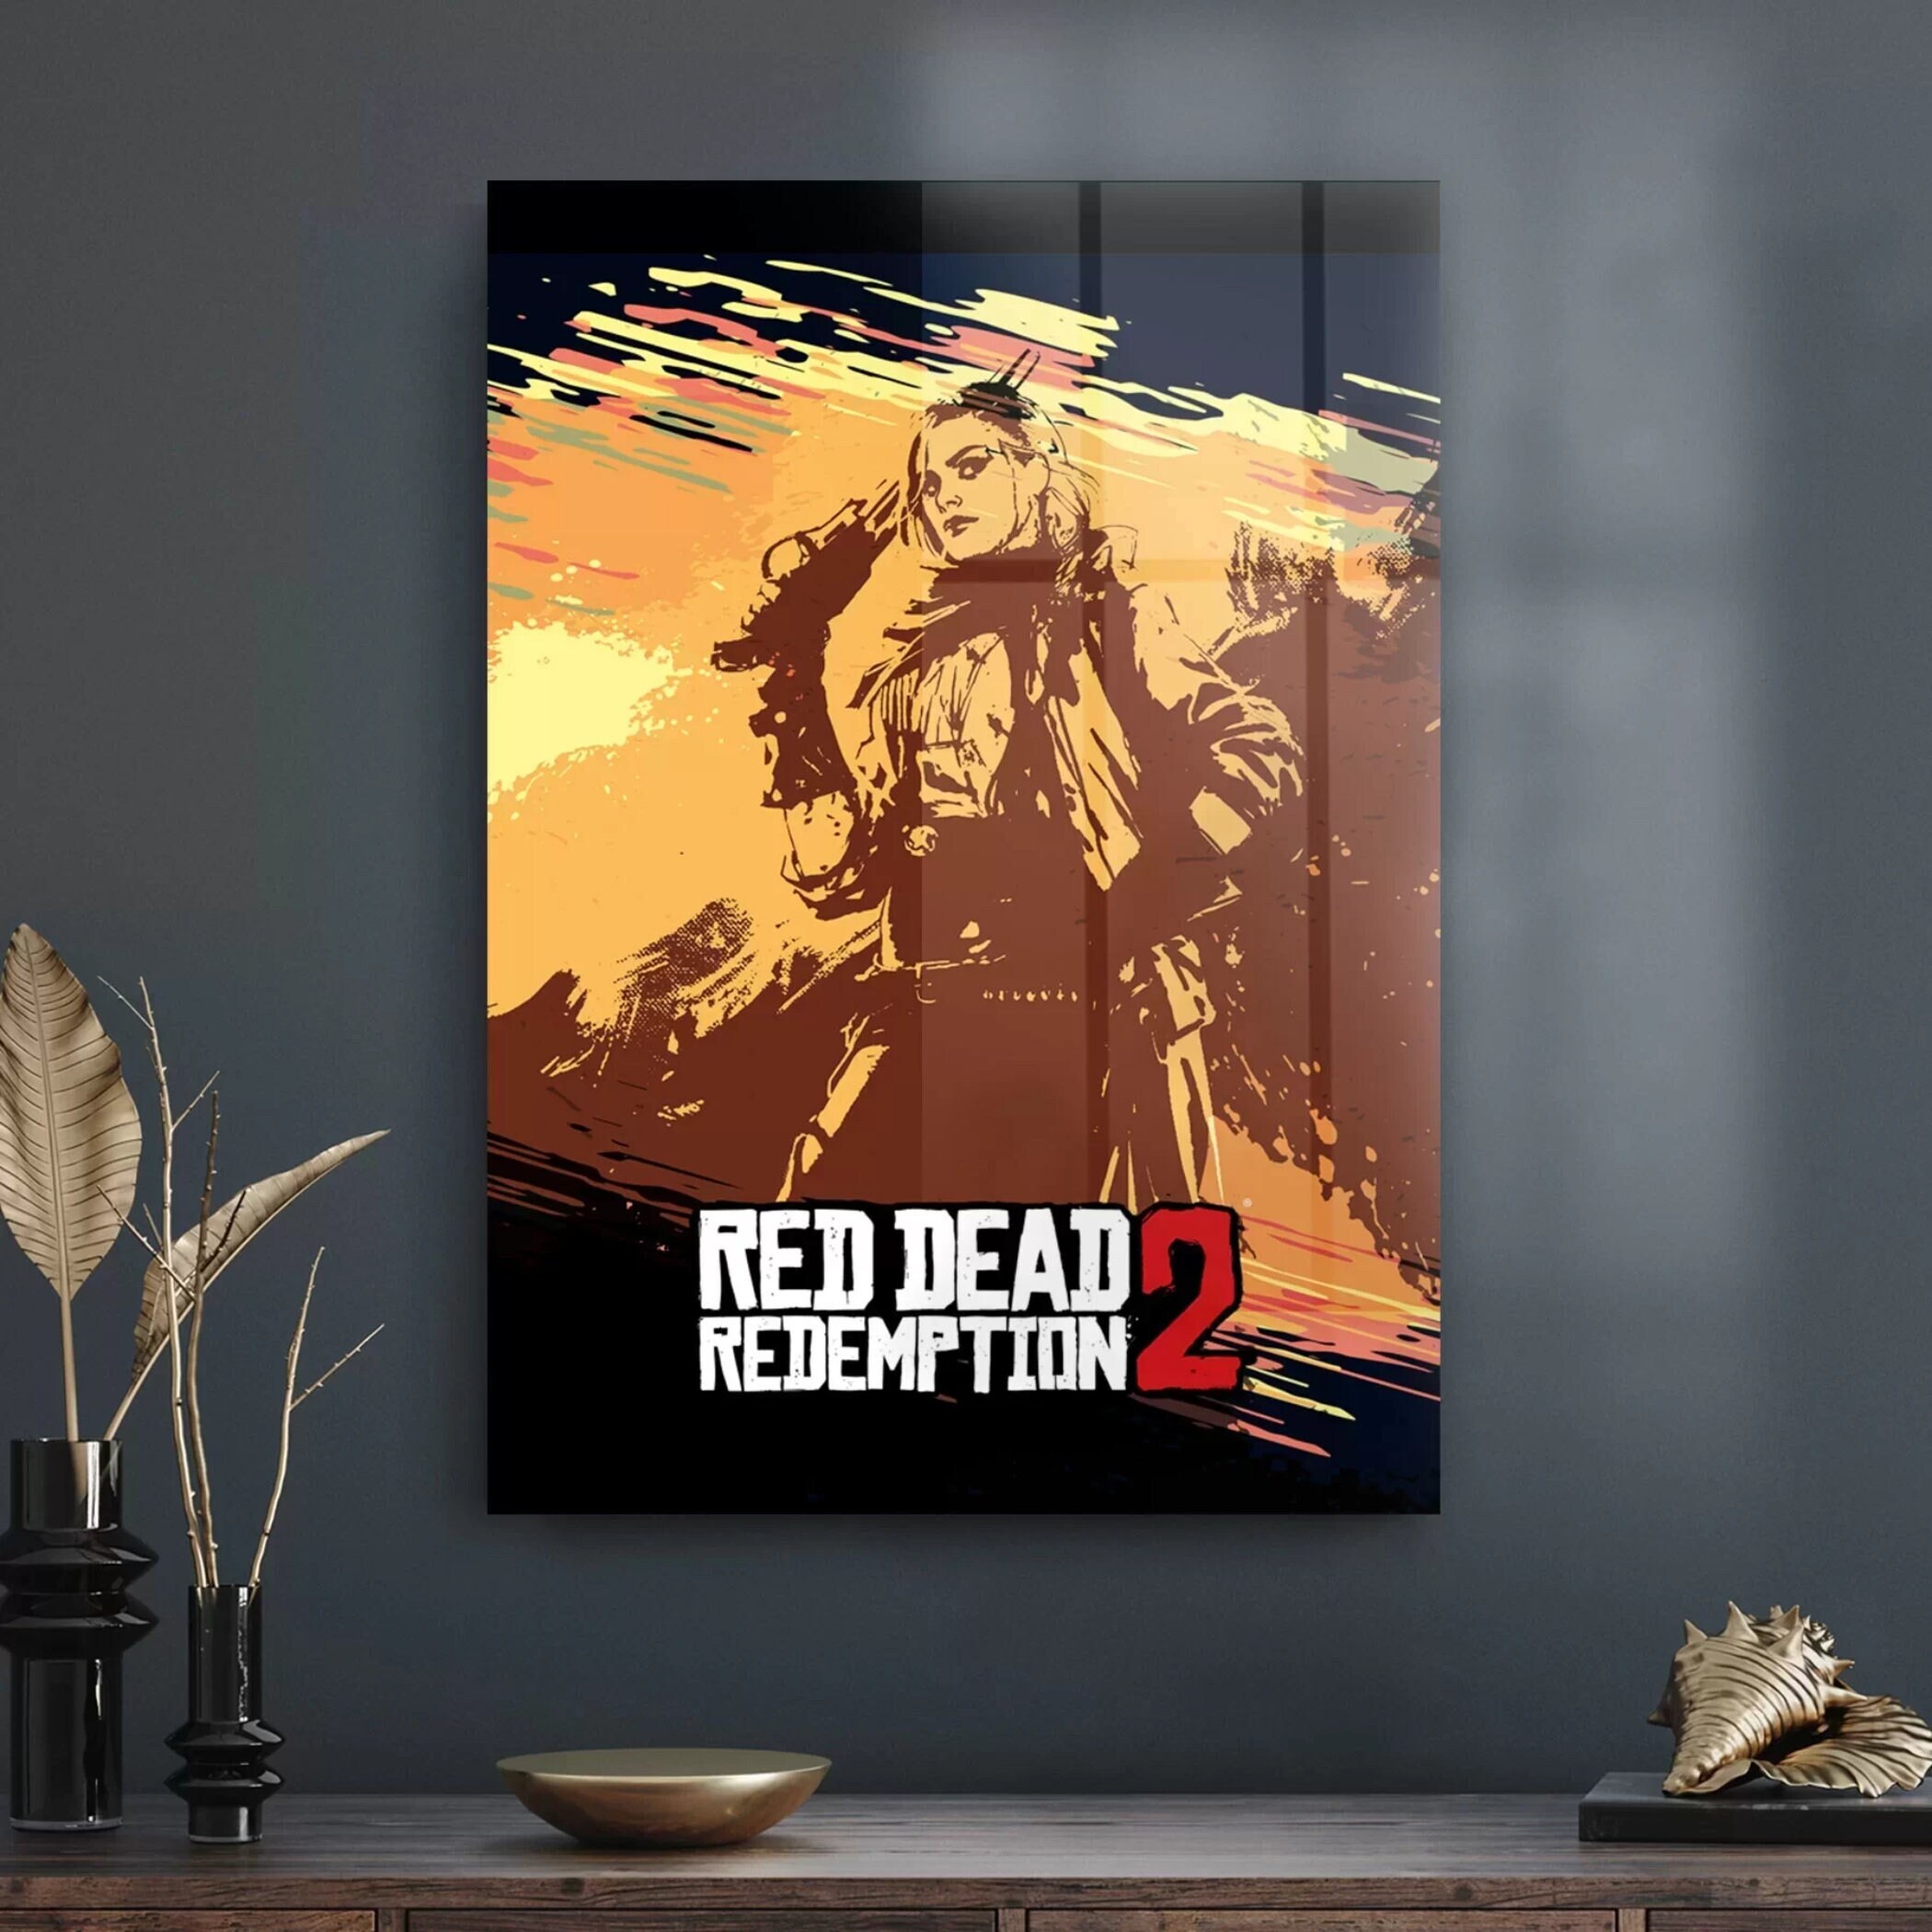  Red Dead Redemption 2, Red Dead Redemption, Arthur Morgan,  Rockstar Games, pc Game Games poster Vintage Metal Tin Signs Modern Wall  Decoration for Bedroom Office Home Wall Home Room 8x12